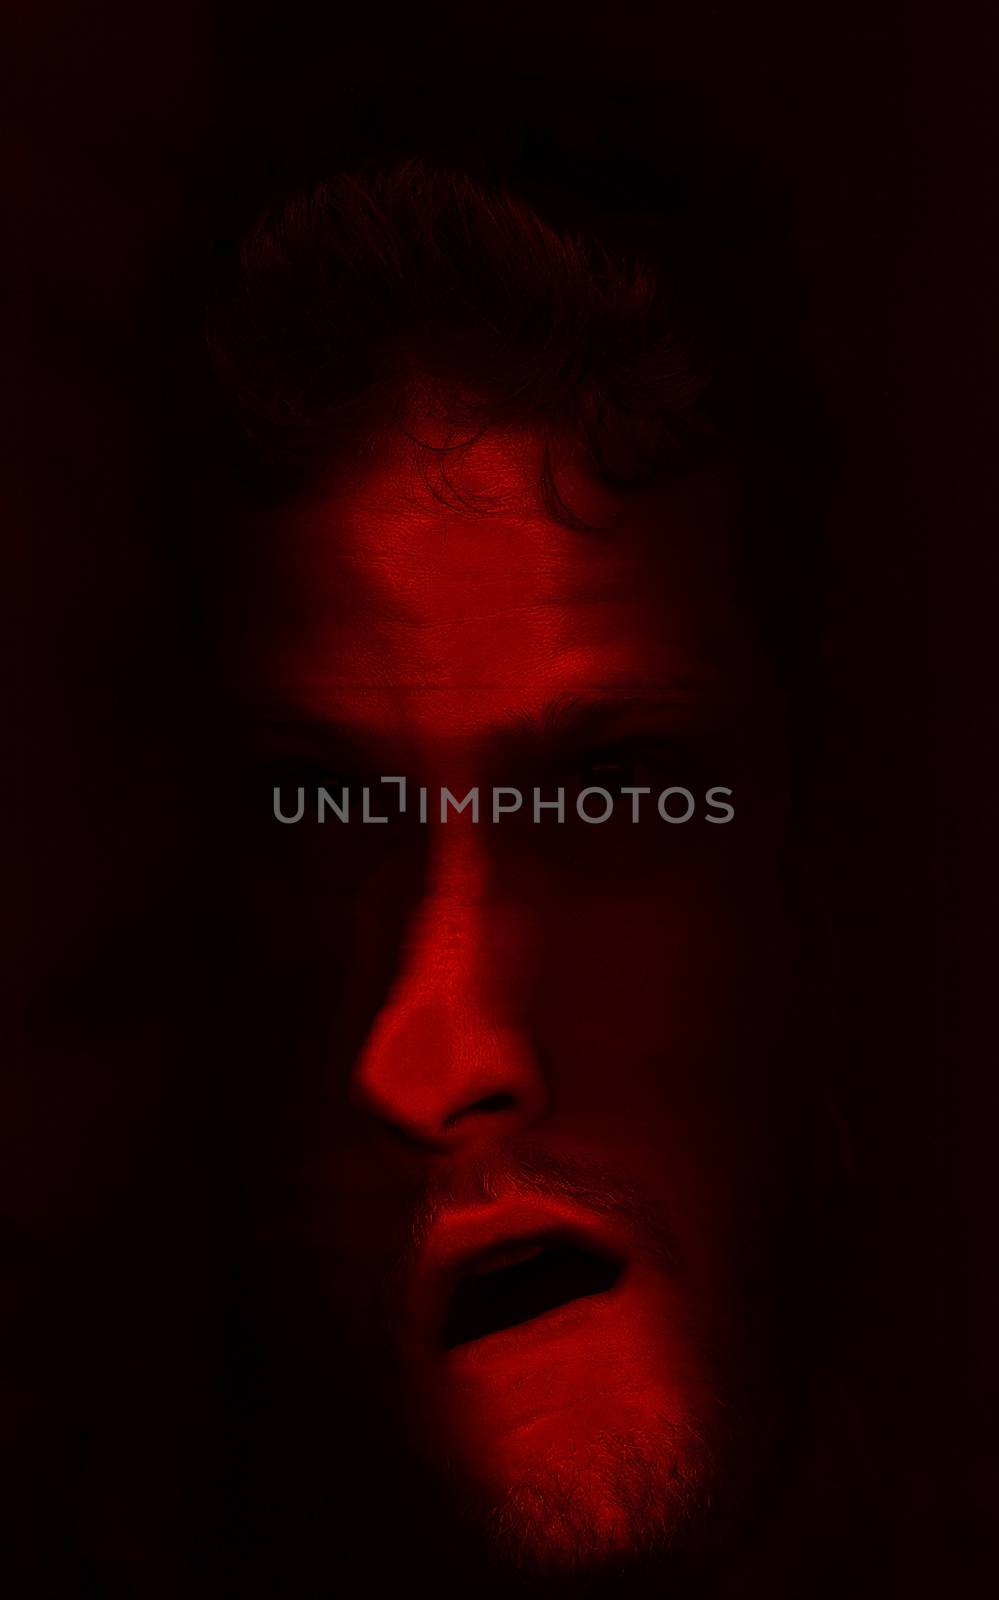 Distorted man's face in red color